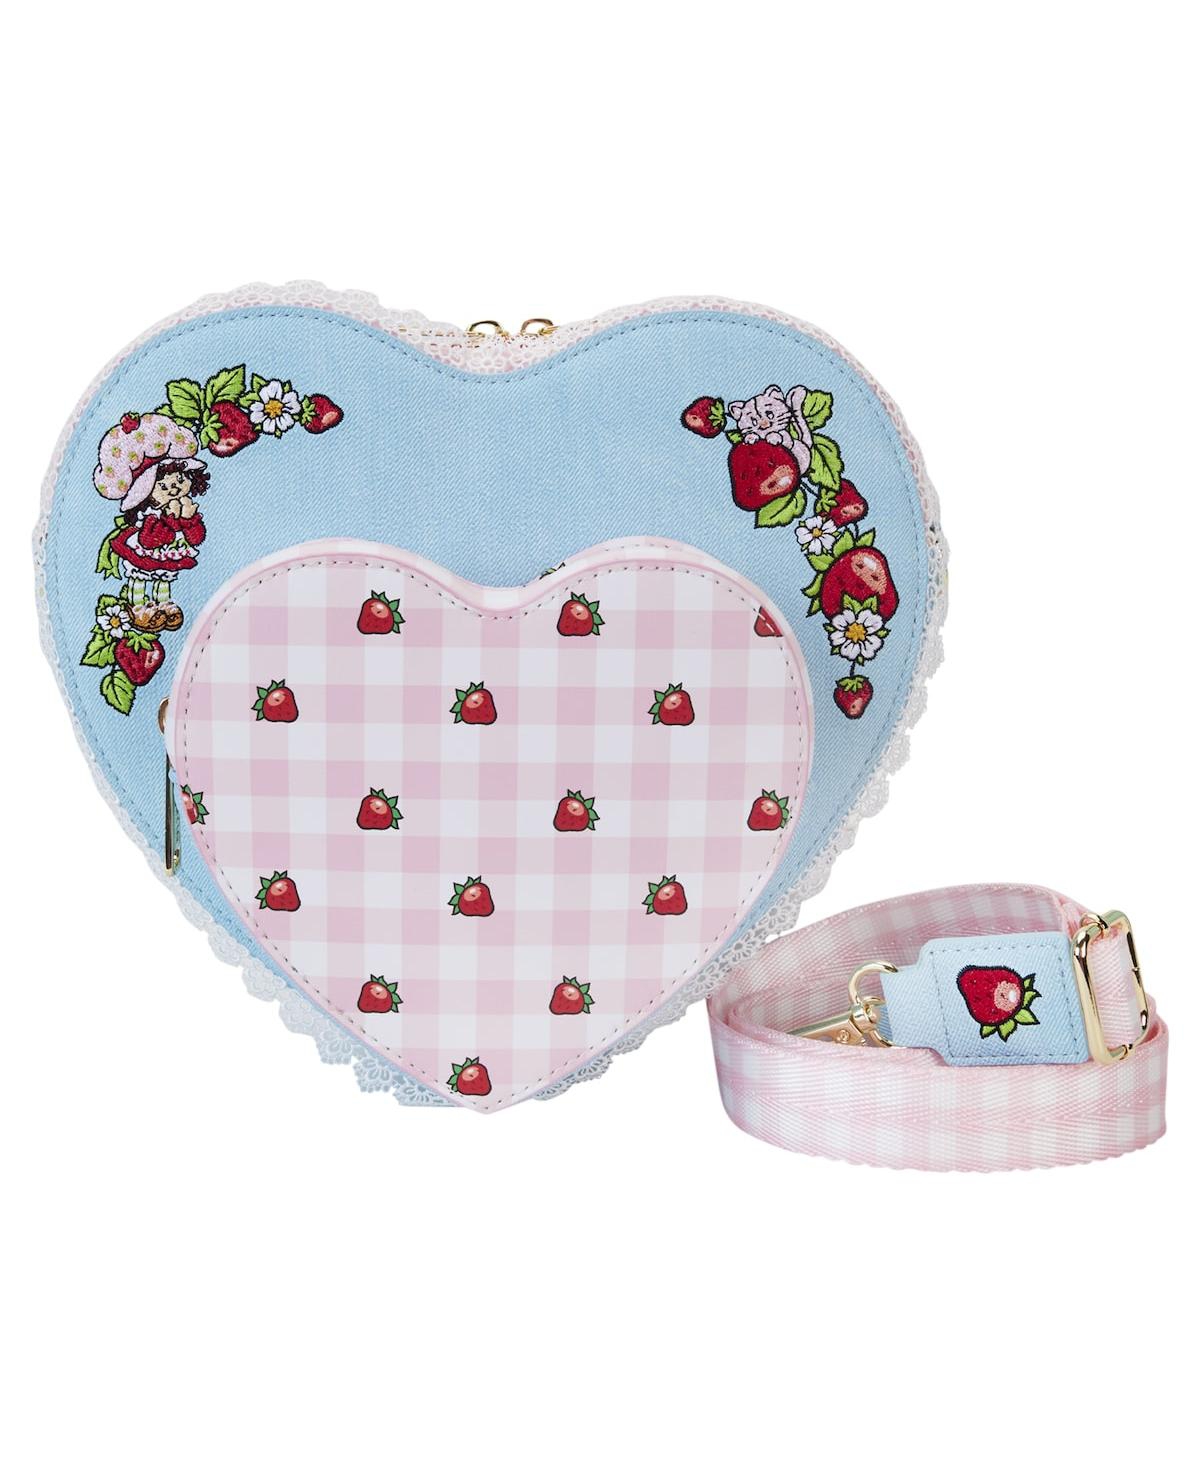 Loungefly Strawberry Shortcake Denim Heart-shaped Figural Crossbody Bag In No Color